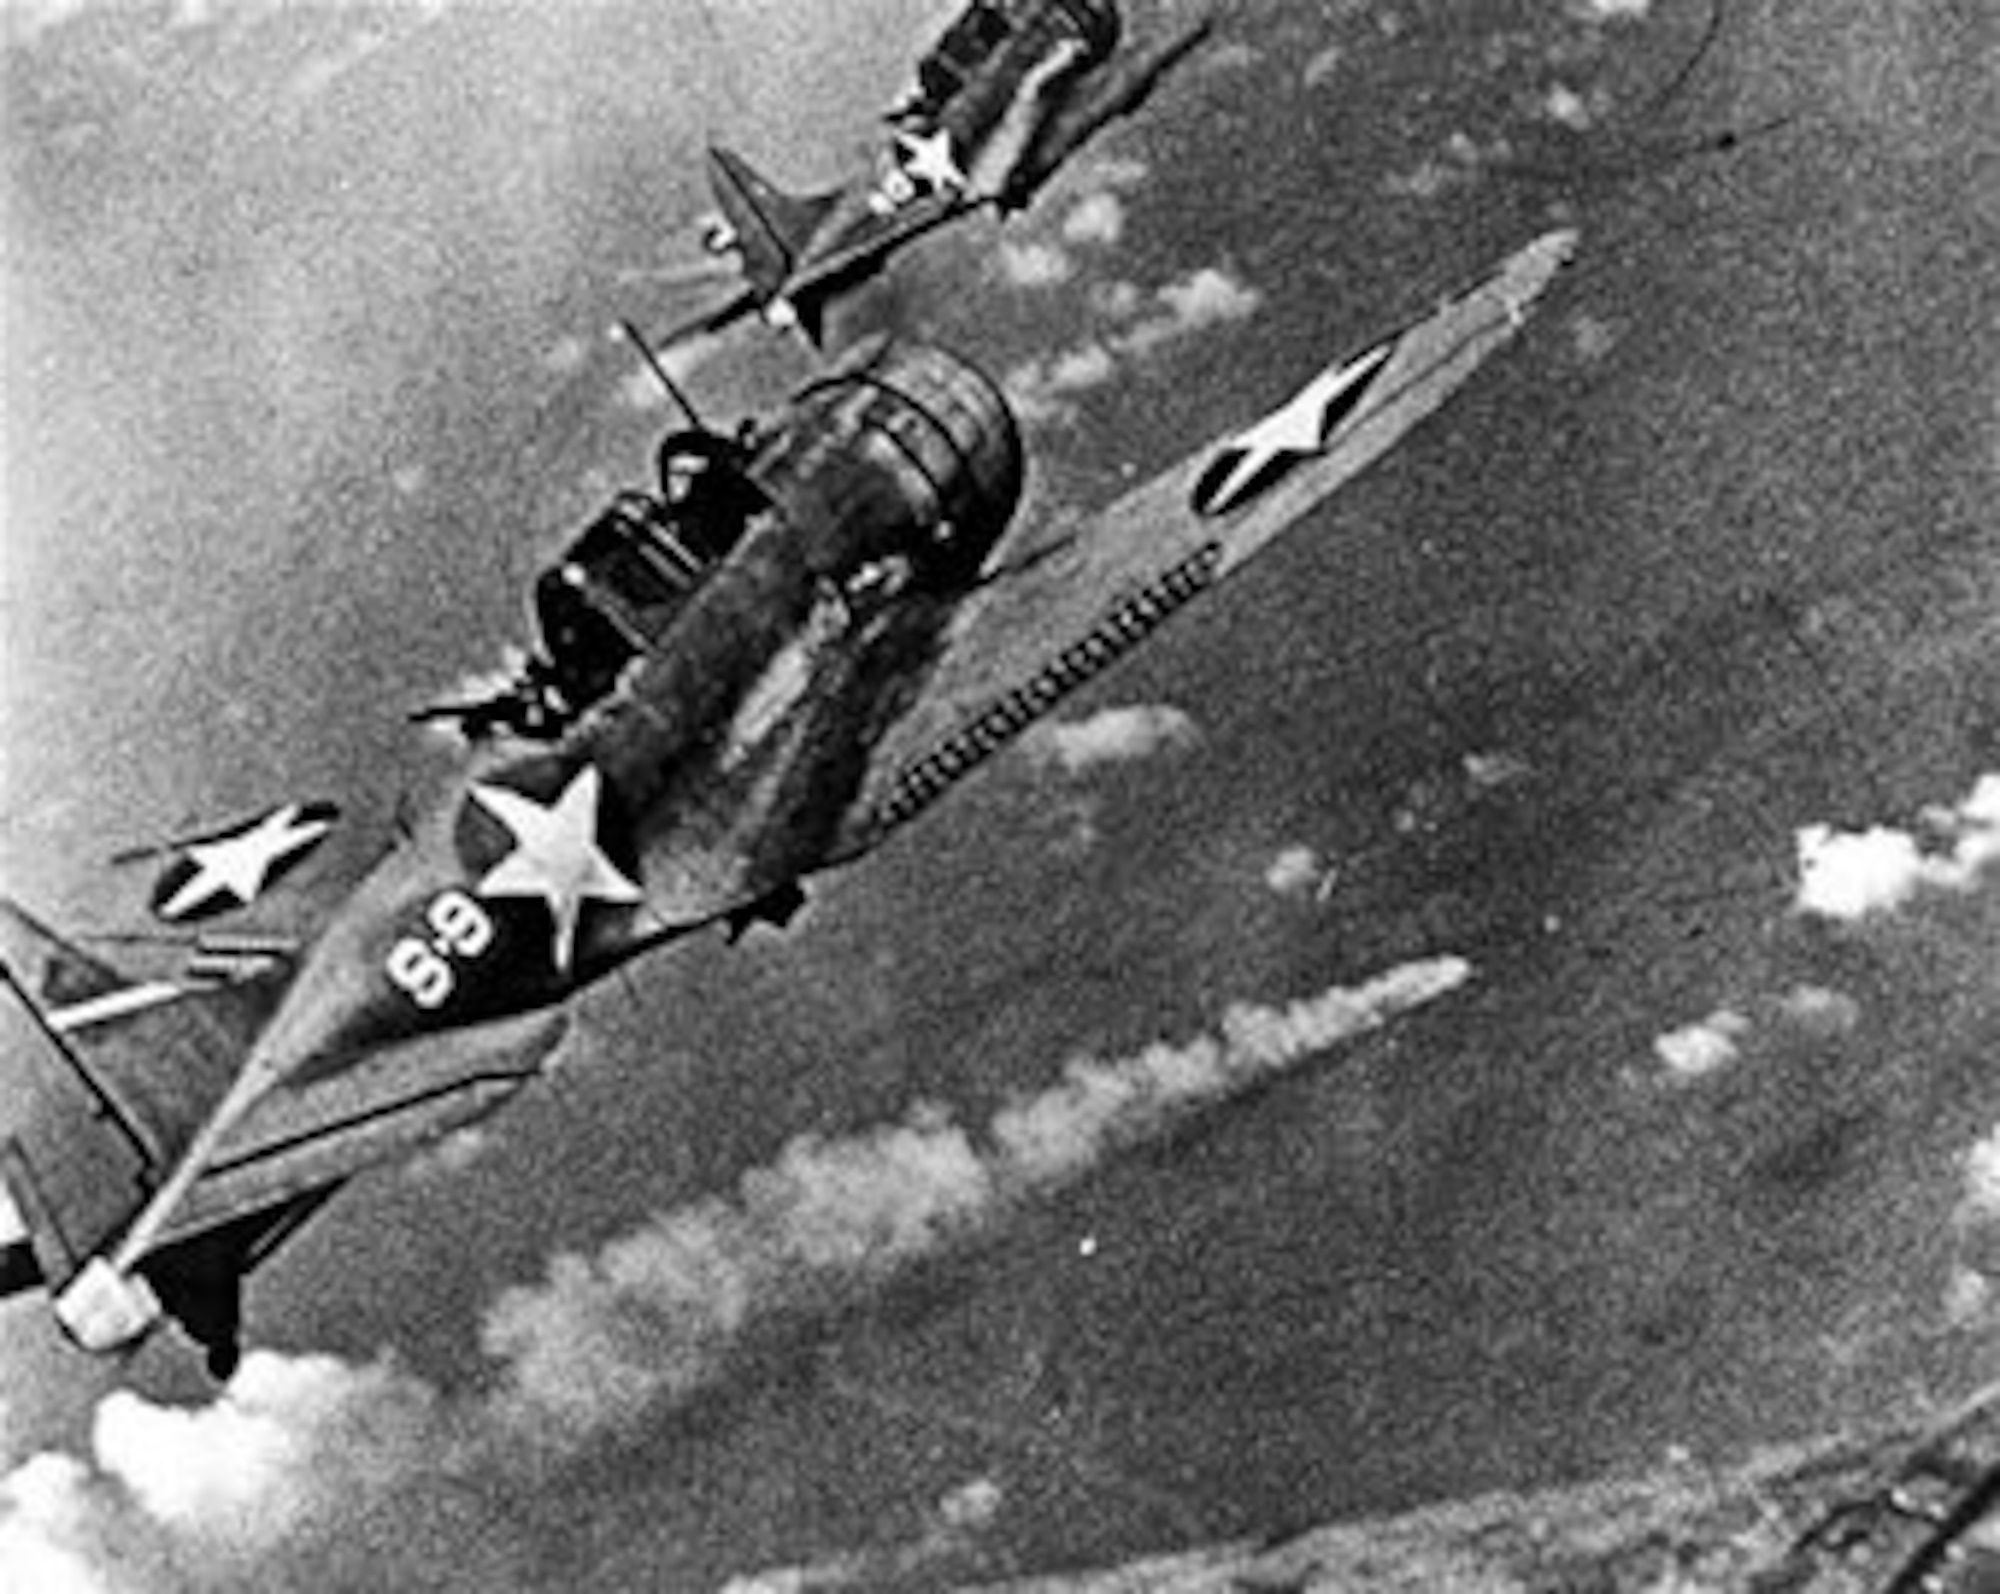 U.S. Navy SBD Dauntless dive bombers approach the burning Japanese heavy cruiser Mikuma for a third round of attacks near Midway Island, June 6, 1942.  Mikuma was one of five Japanese ships destroyed in the Battle of Midway along with approximately 292 Japanese aircraft.  (U.S. Navy photo courtesy of the National Archives Collection)    